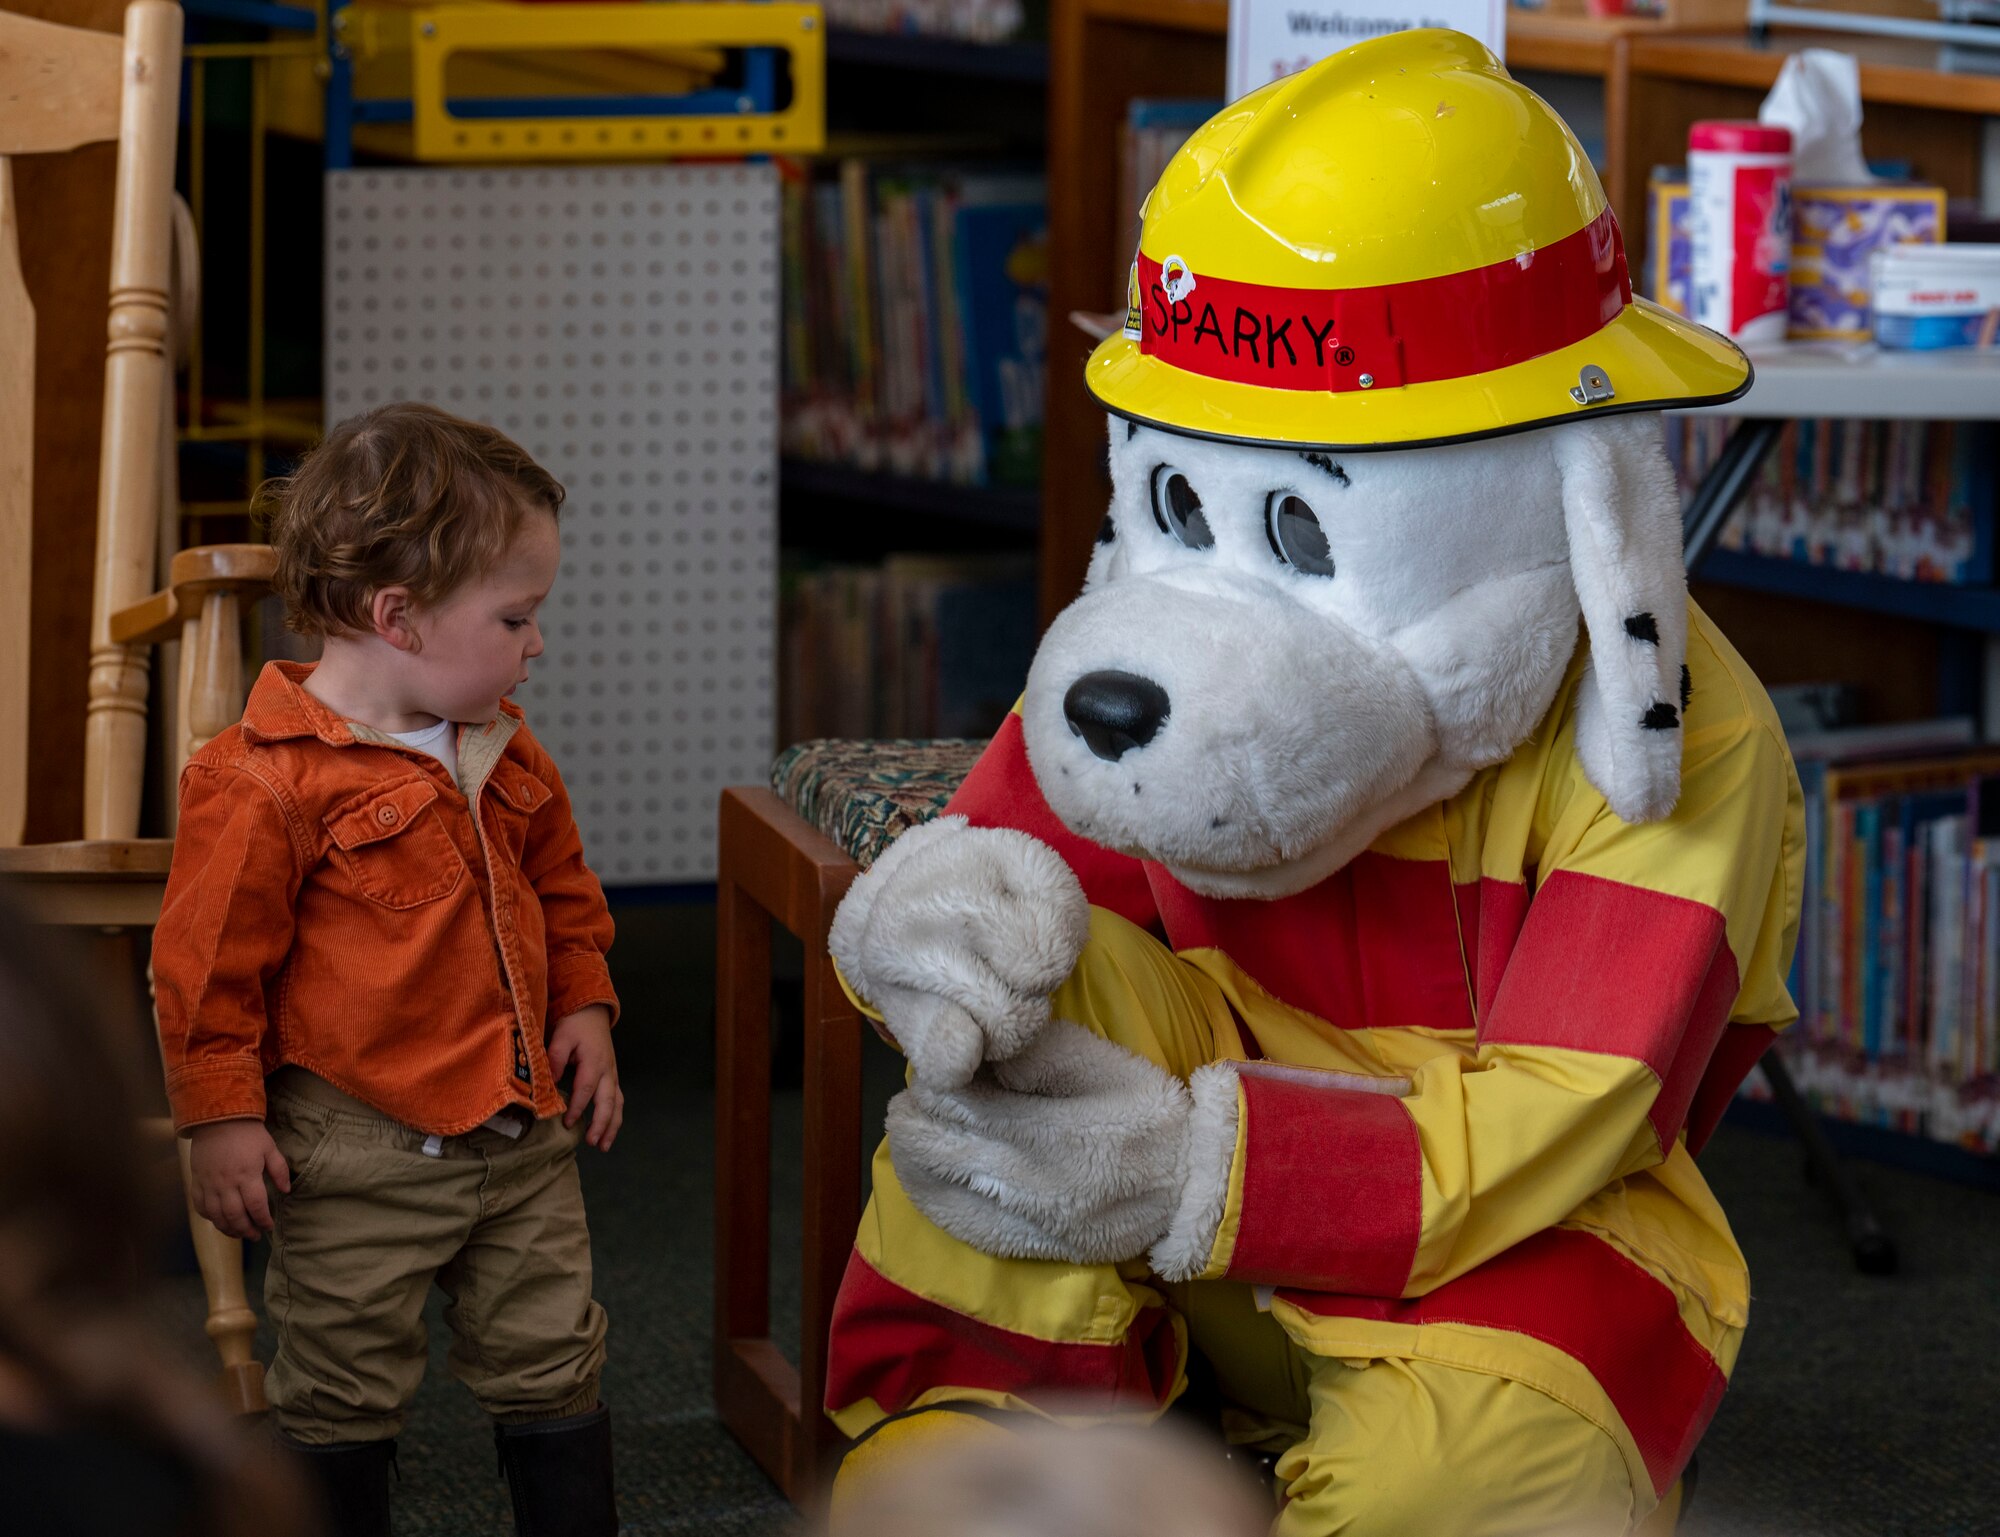 Sparky the Fire Dog, the mascot for National Fire Protection Association, greets a child.